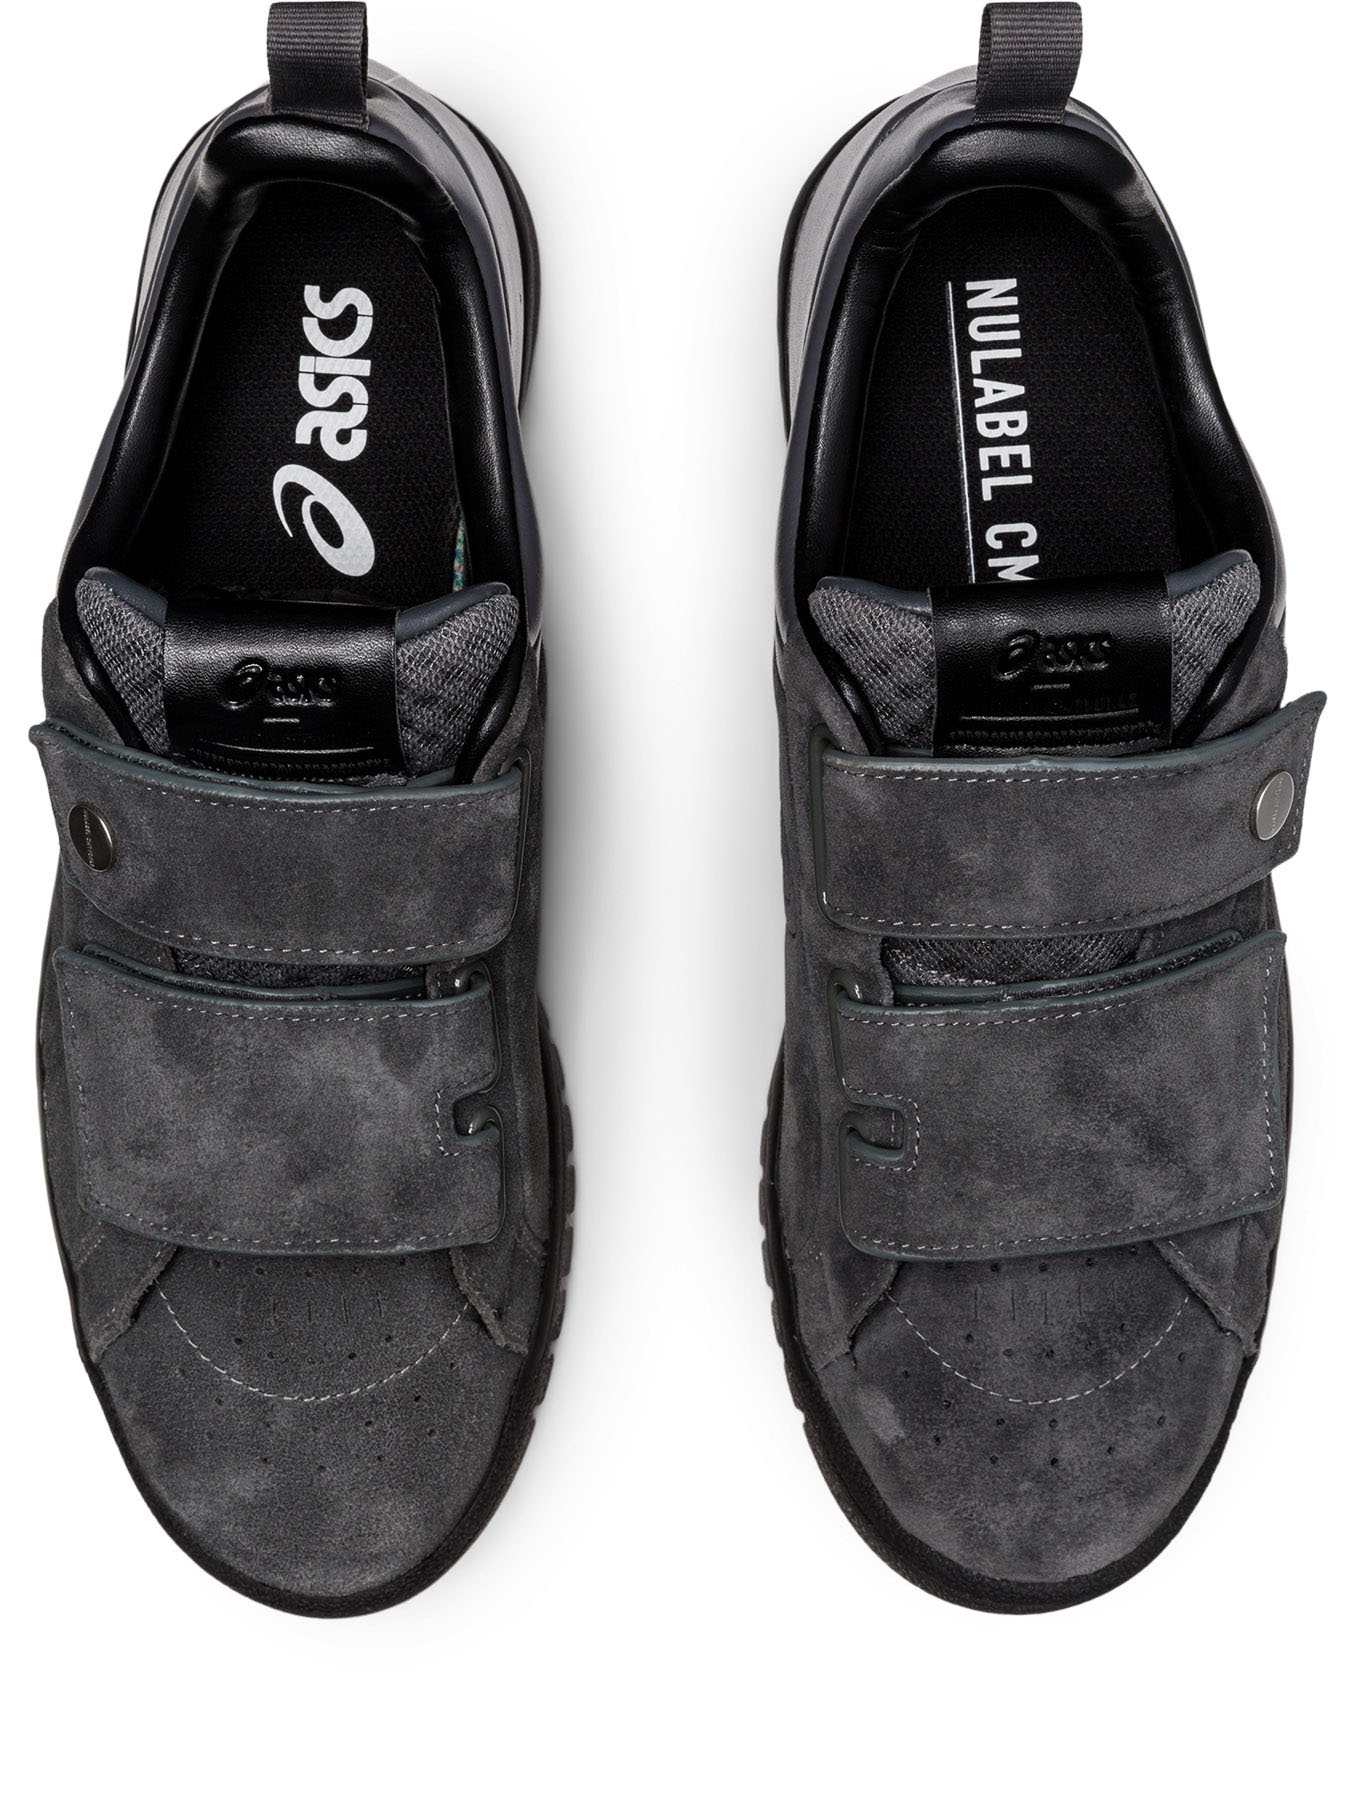 ASICS SportStyle × NULABEL CM1Y0K42 Vol.2 Collection | SHOES MASTER